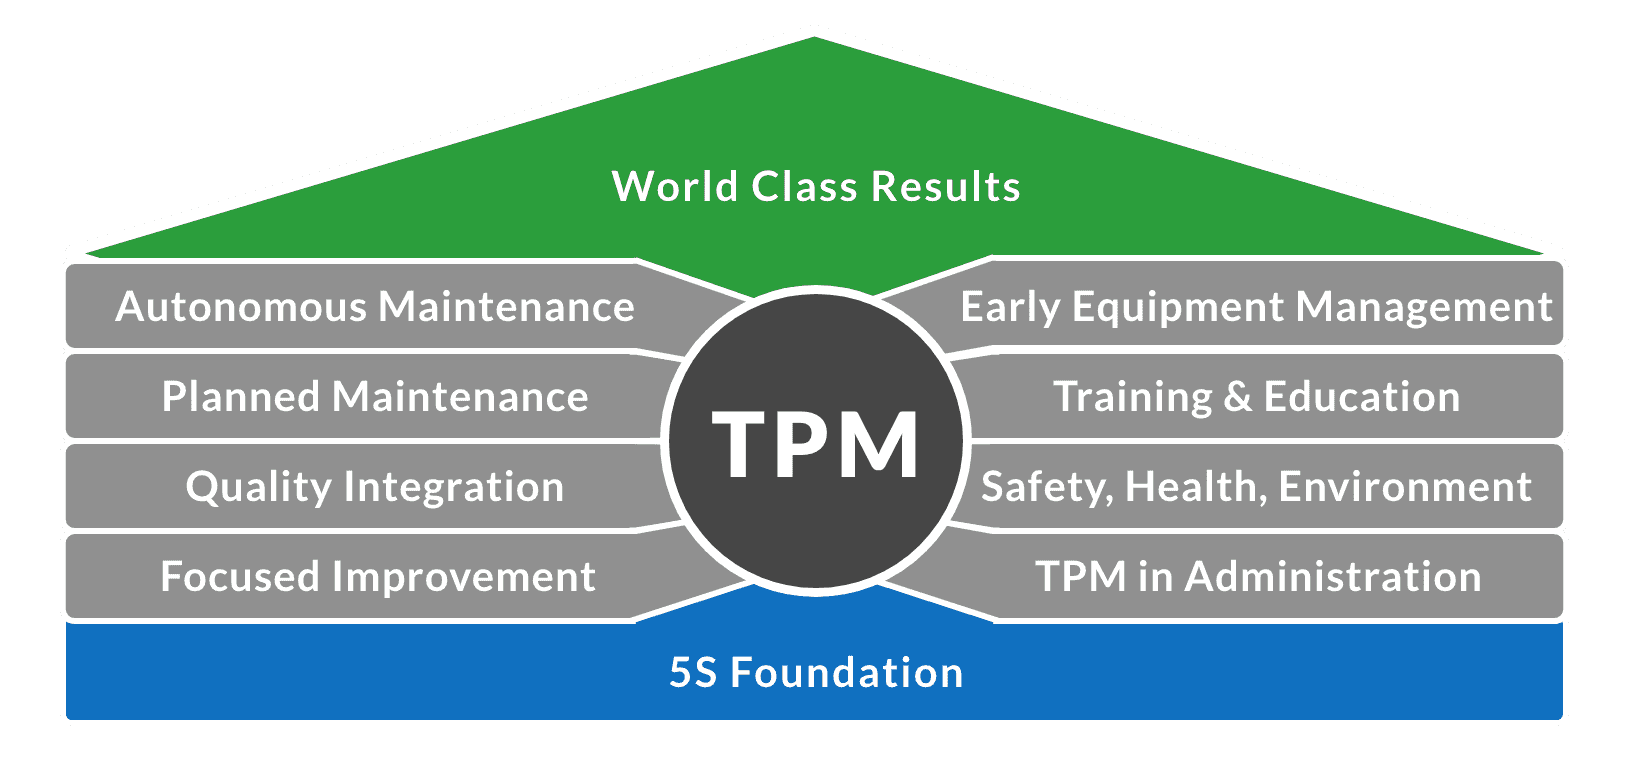 A 5s foundation with supporting TPM activities will lead to world class results.